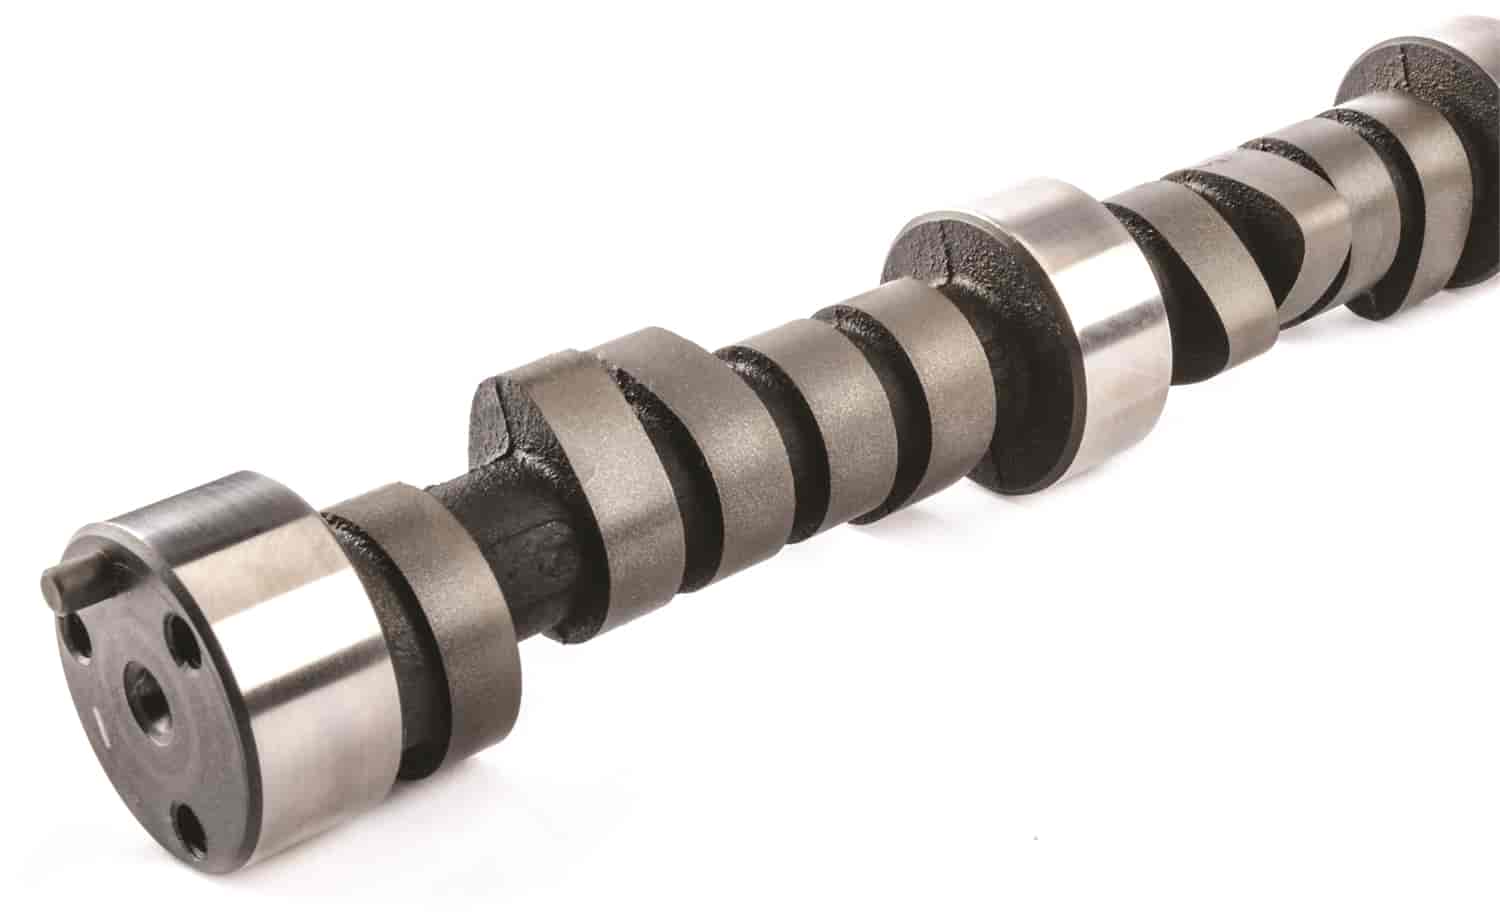 COMP Cams 12-602-4: Big Mutha" Thumpr Hydraulic Flat Tappet Camshaft Lift  .500"/.486" Duration 295/313 RPM Range 2500 to 6400 - JEGS High Performance